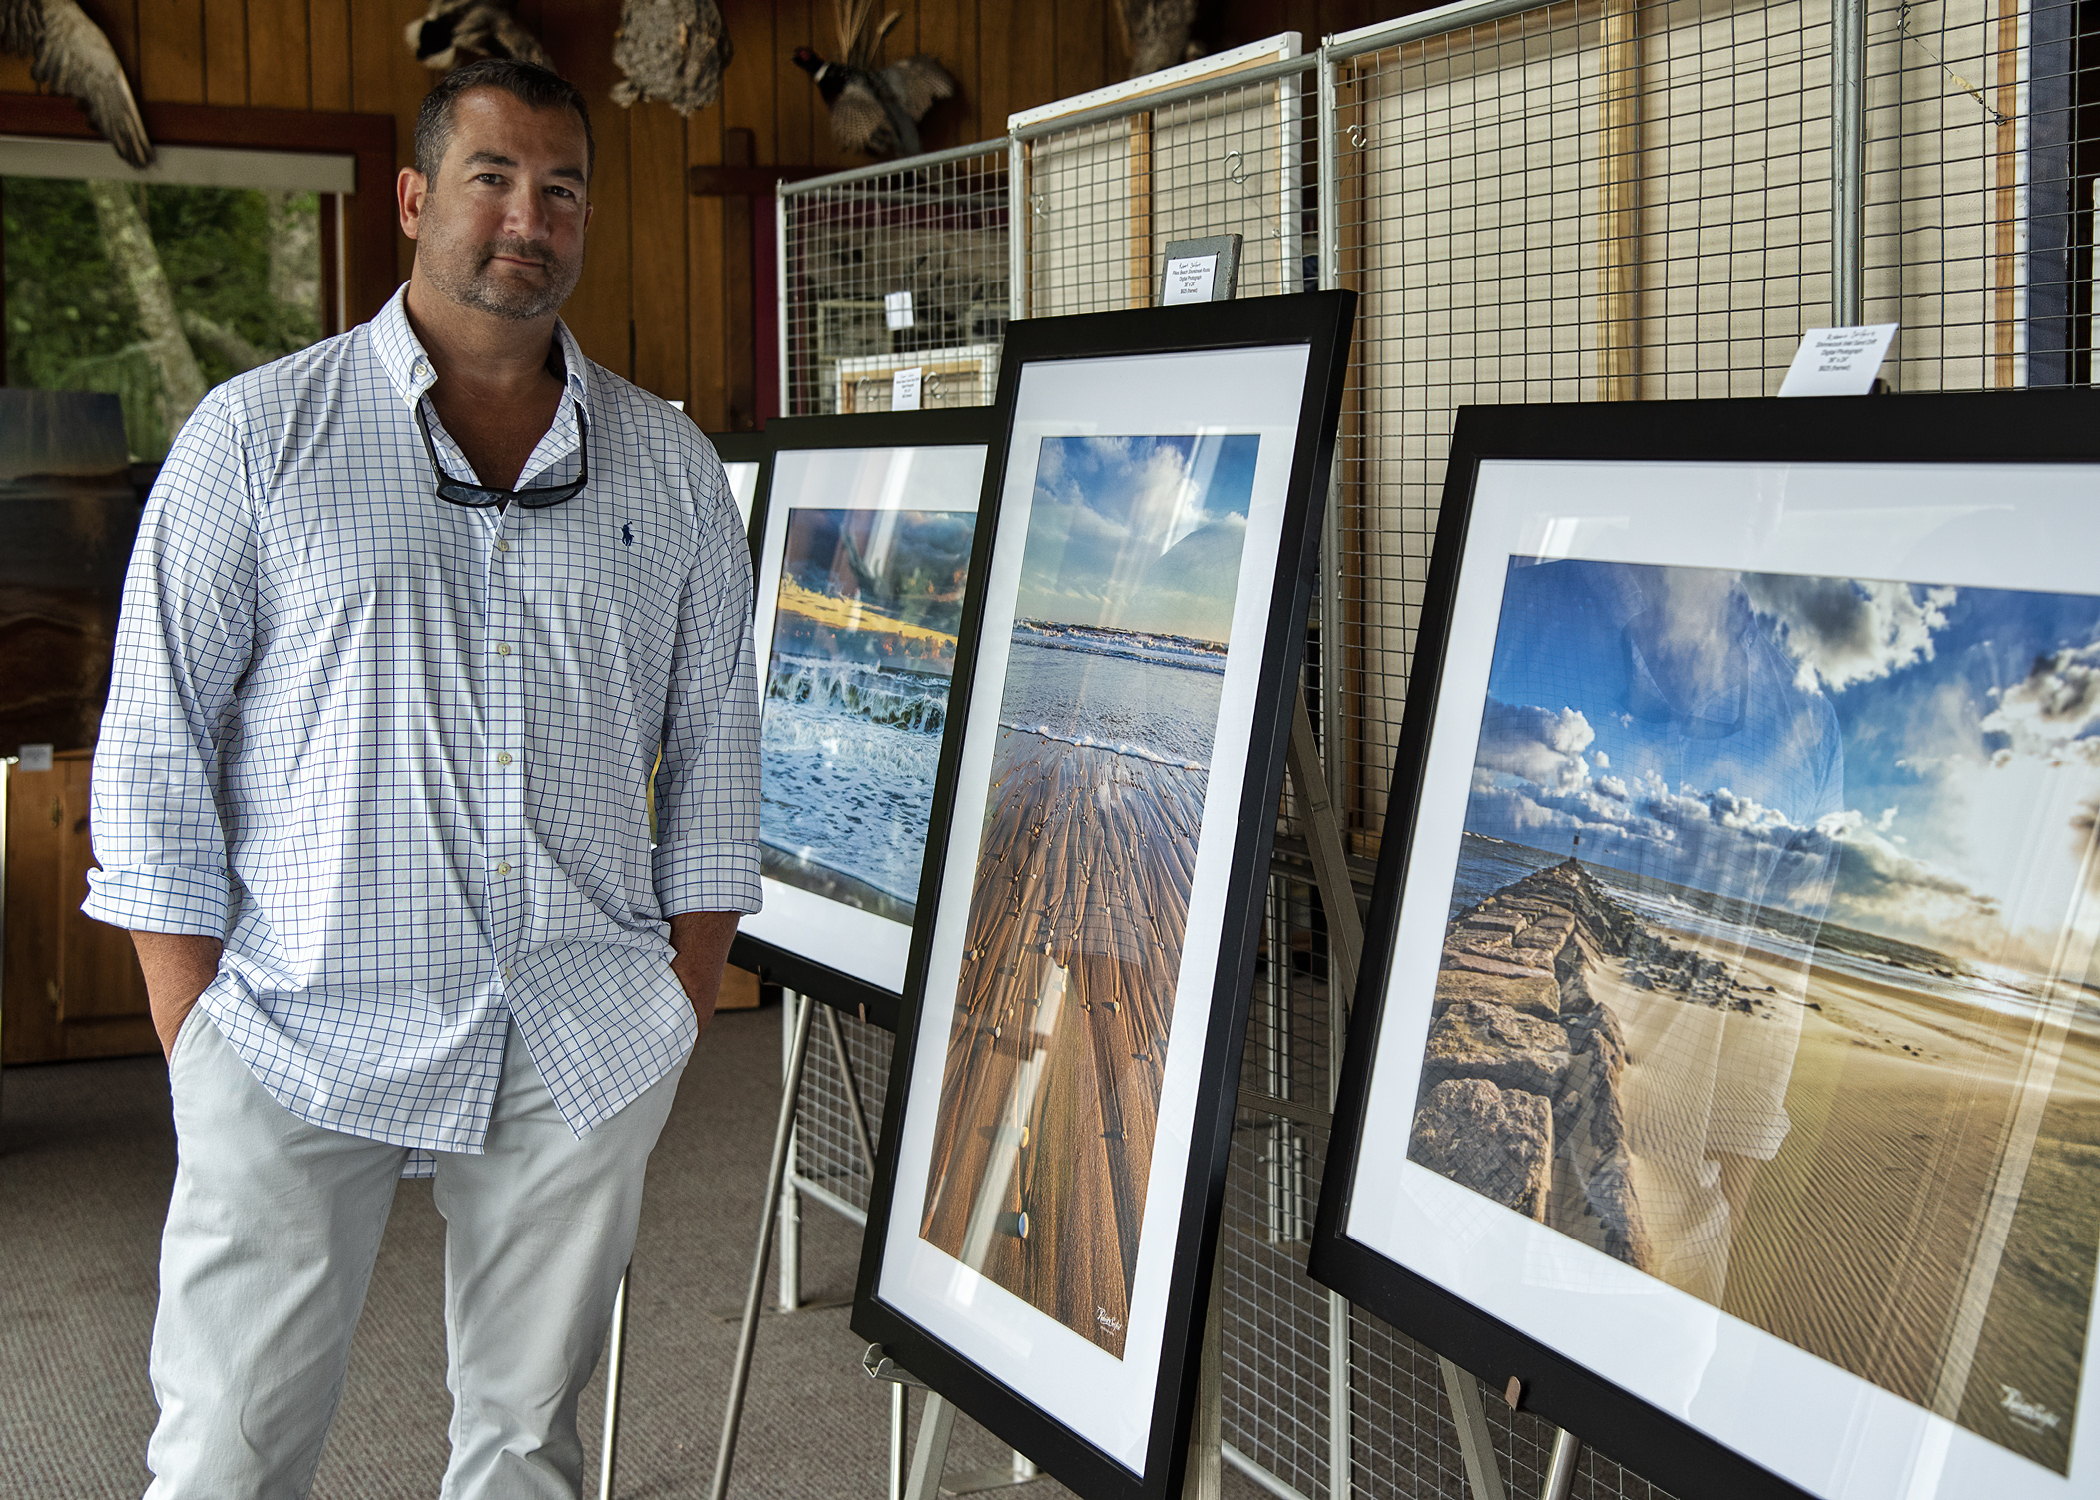 Rob Seifert, by his photography, at an artists showcase, “Visions of Nature Art Exhibition,” curated by Elizabeth Hartman of HartmanonHudson.com, at the Quogue Wildlife Refuge on Saturday. A portion of the evening’s sales benefited the refuge.